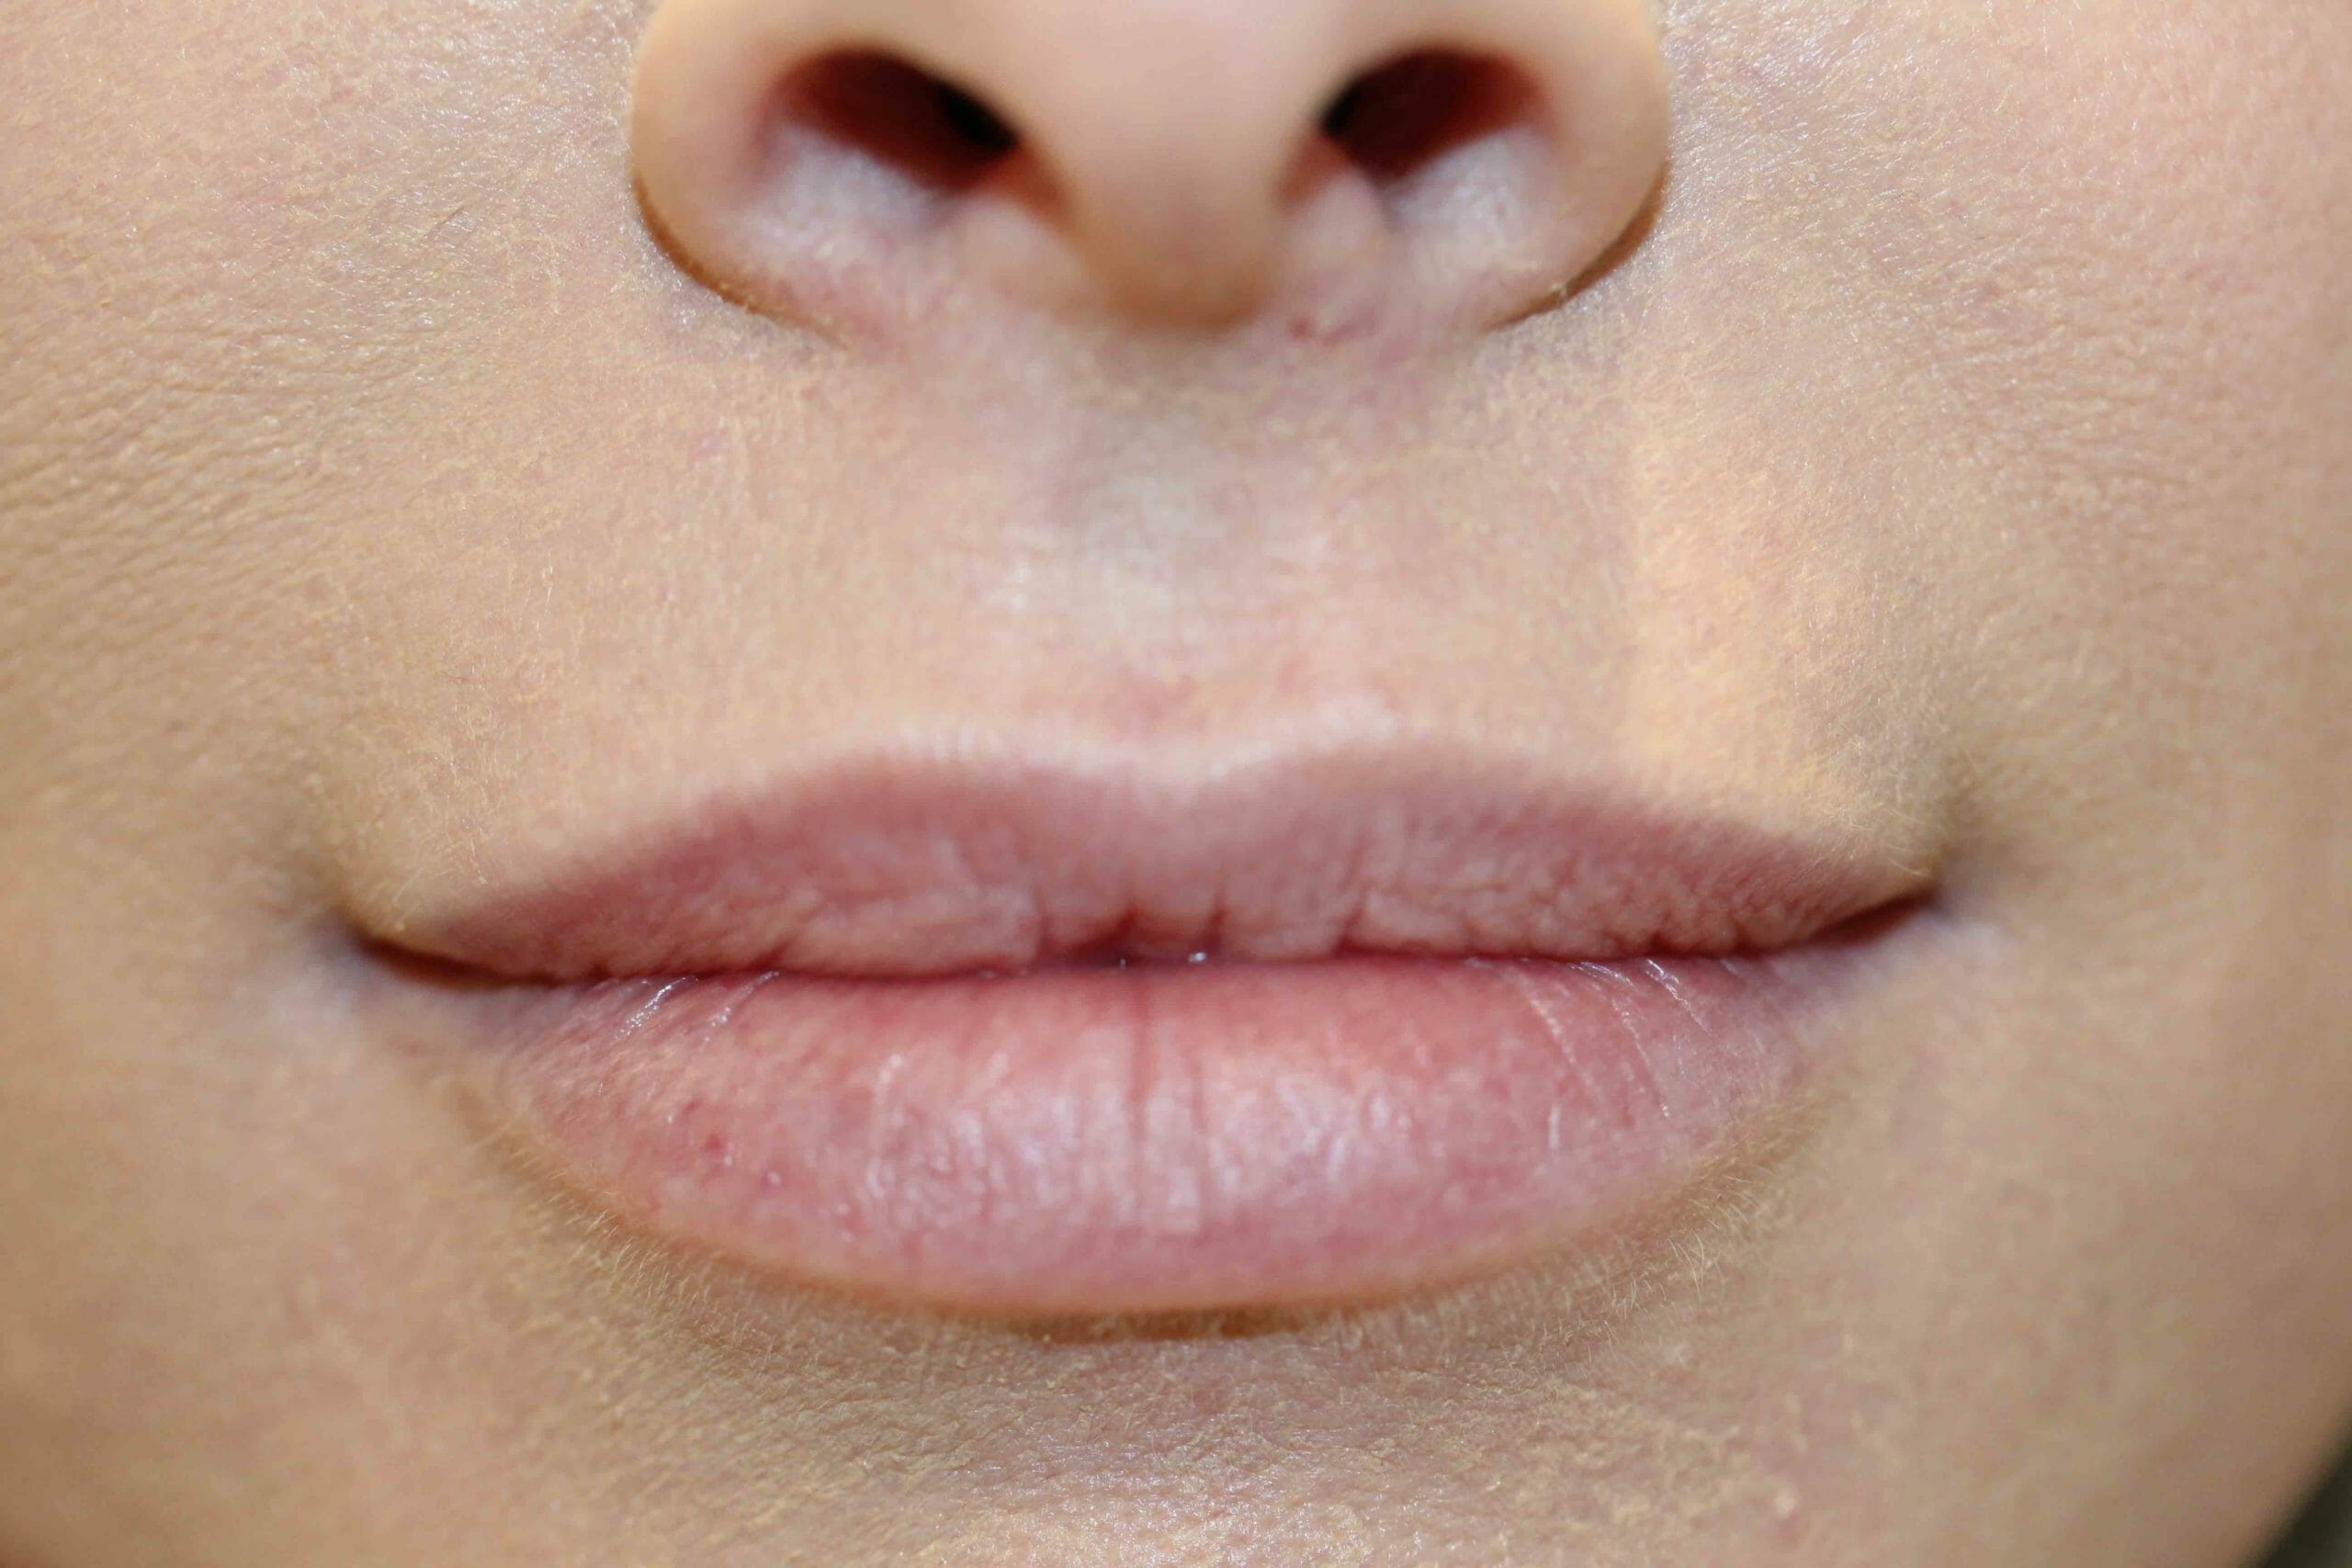 Things To Note About Permanent Lip Tattoos Called Blushing